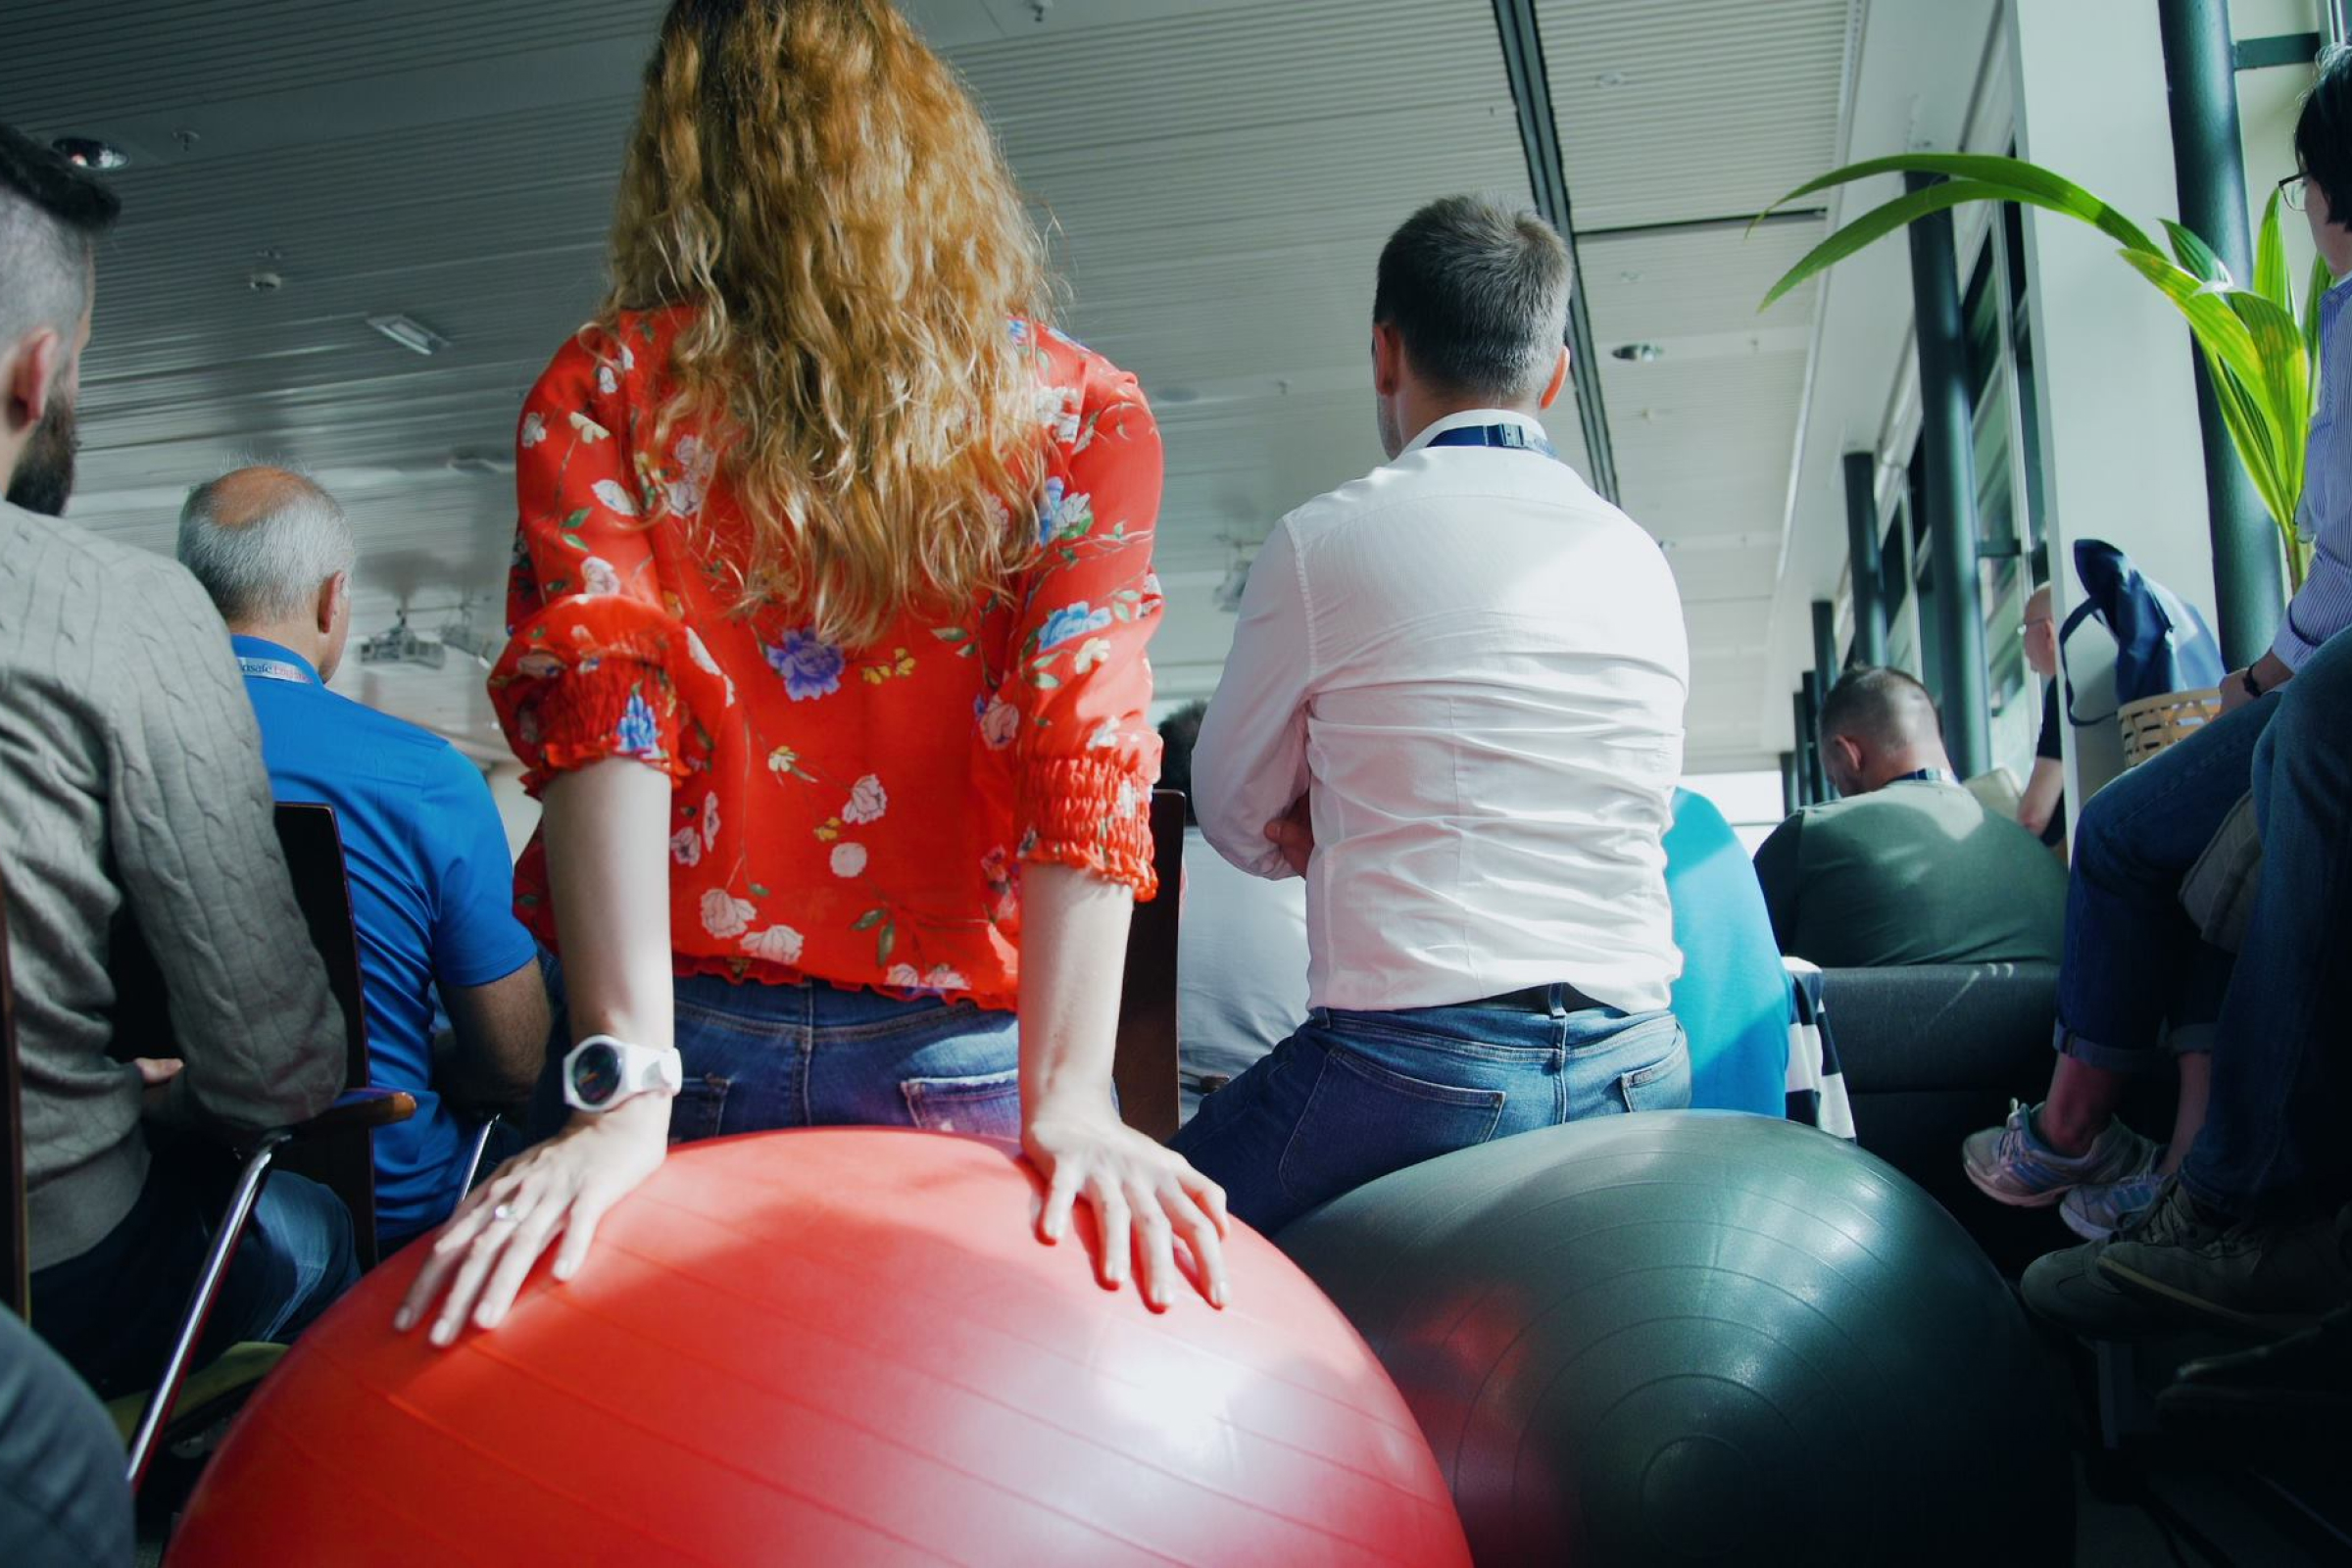 View of people friom behind sitting on pilates balls